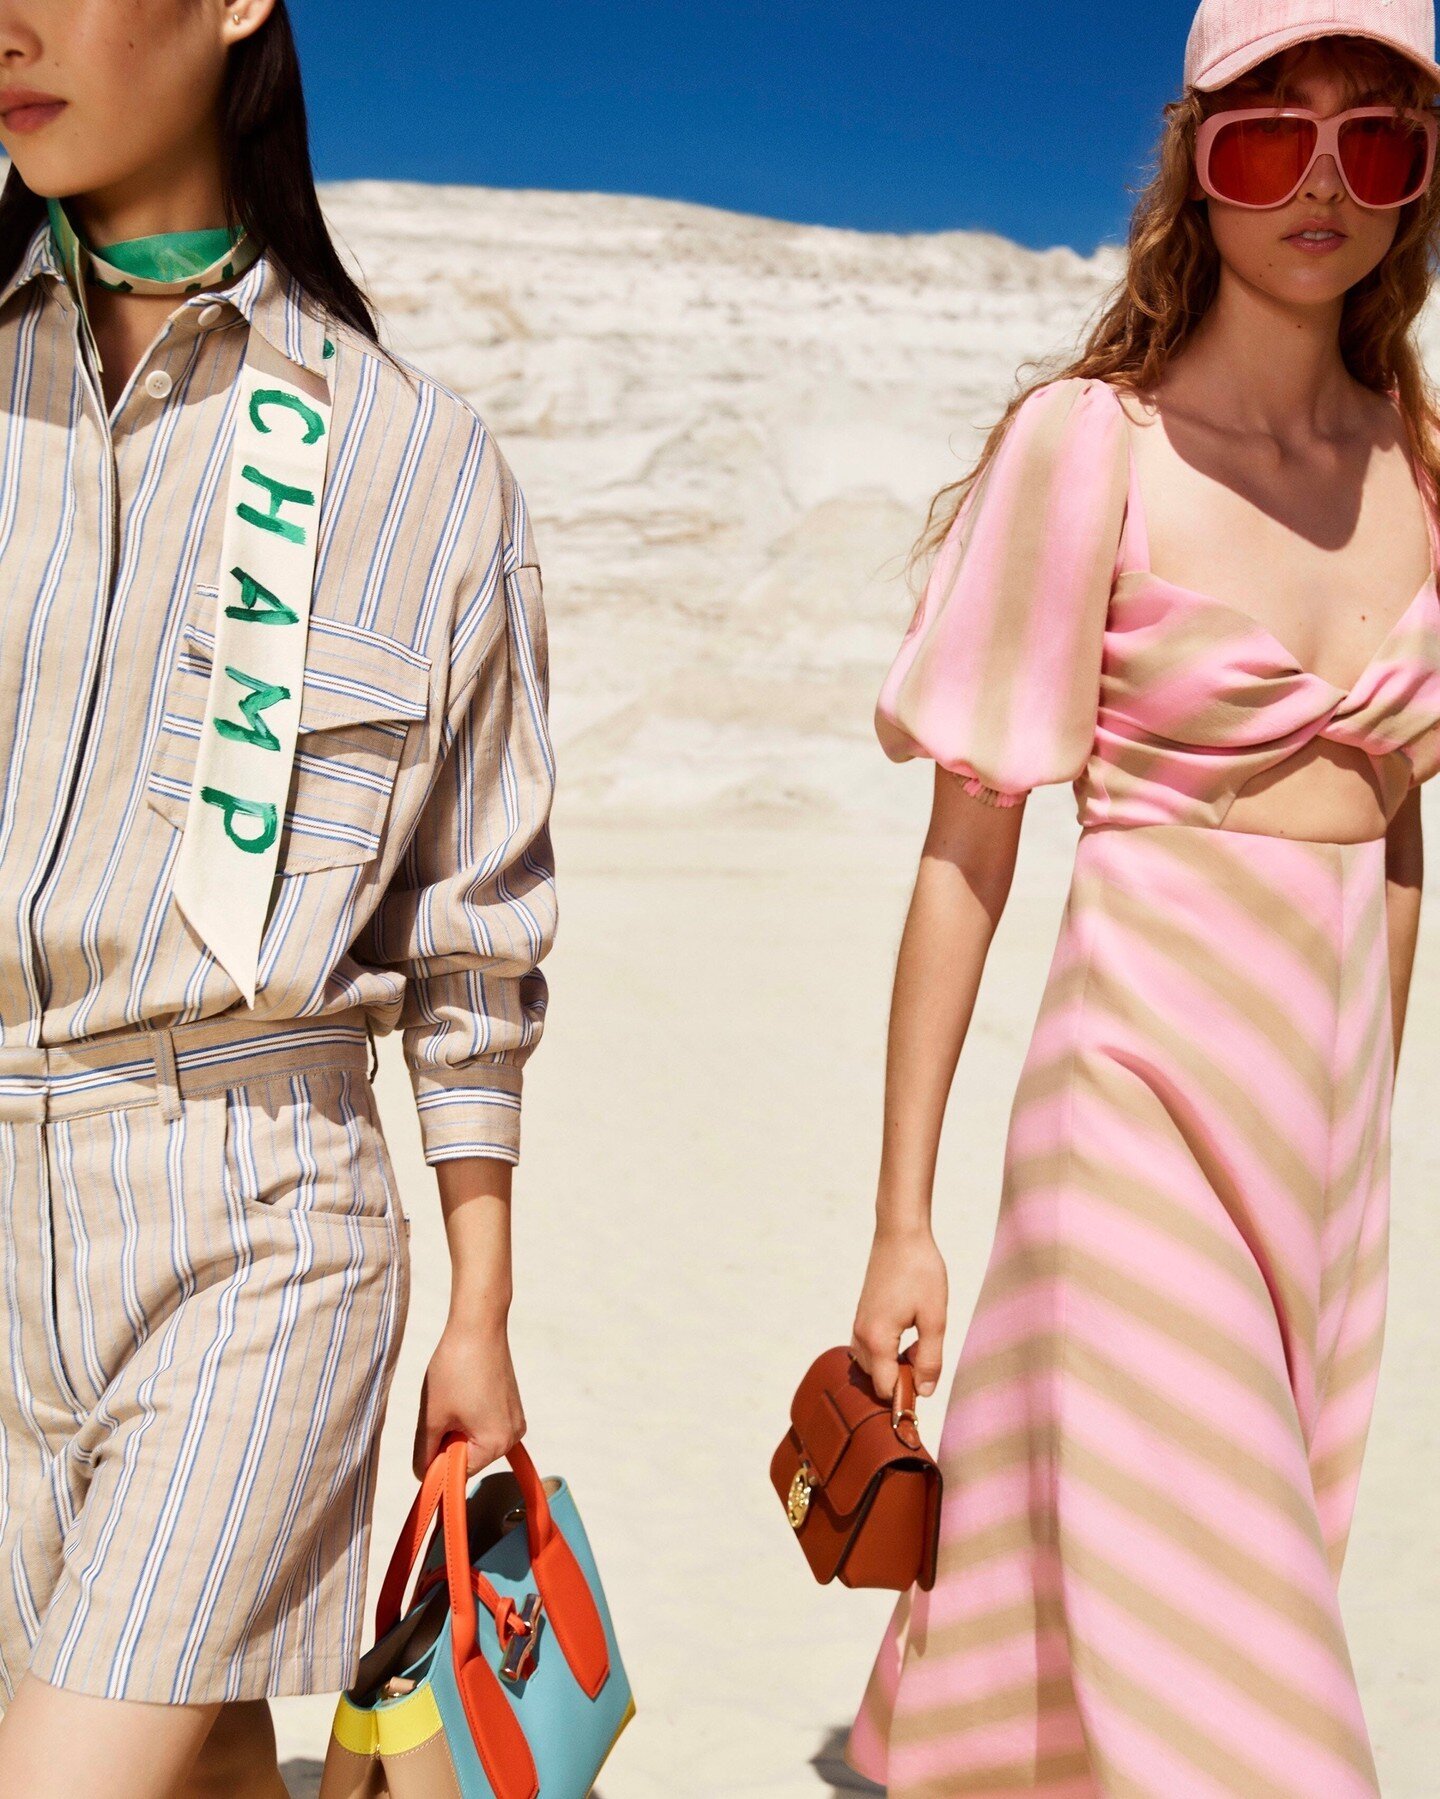 SPING-SUMMER collections 2023
with DESIGNER : LONCHAMP
|
Live your summer in pink, orange and green. Very refreshing looks at LONCHAMP this summer. Total looks with purse, bags and shoes to go with the ensemble. We love the designs and the colours.
|